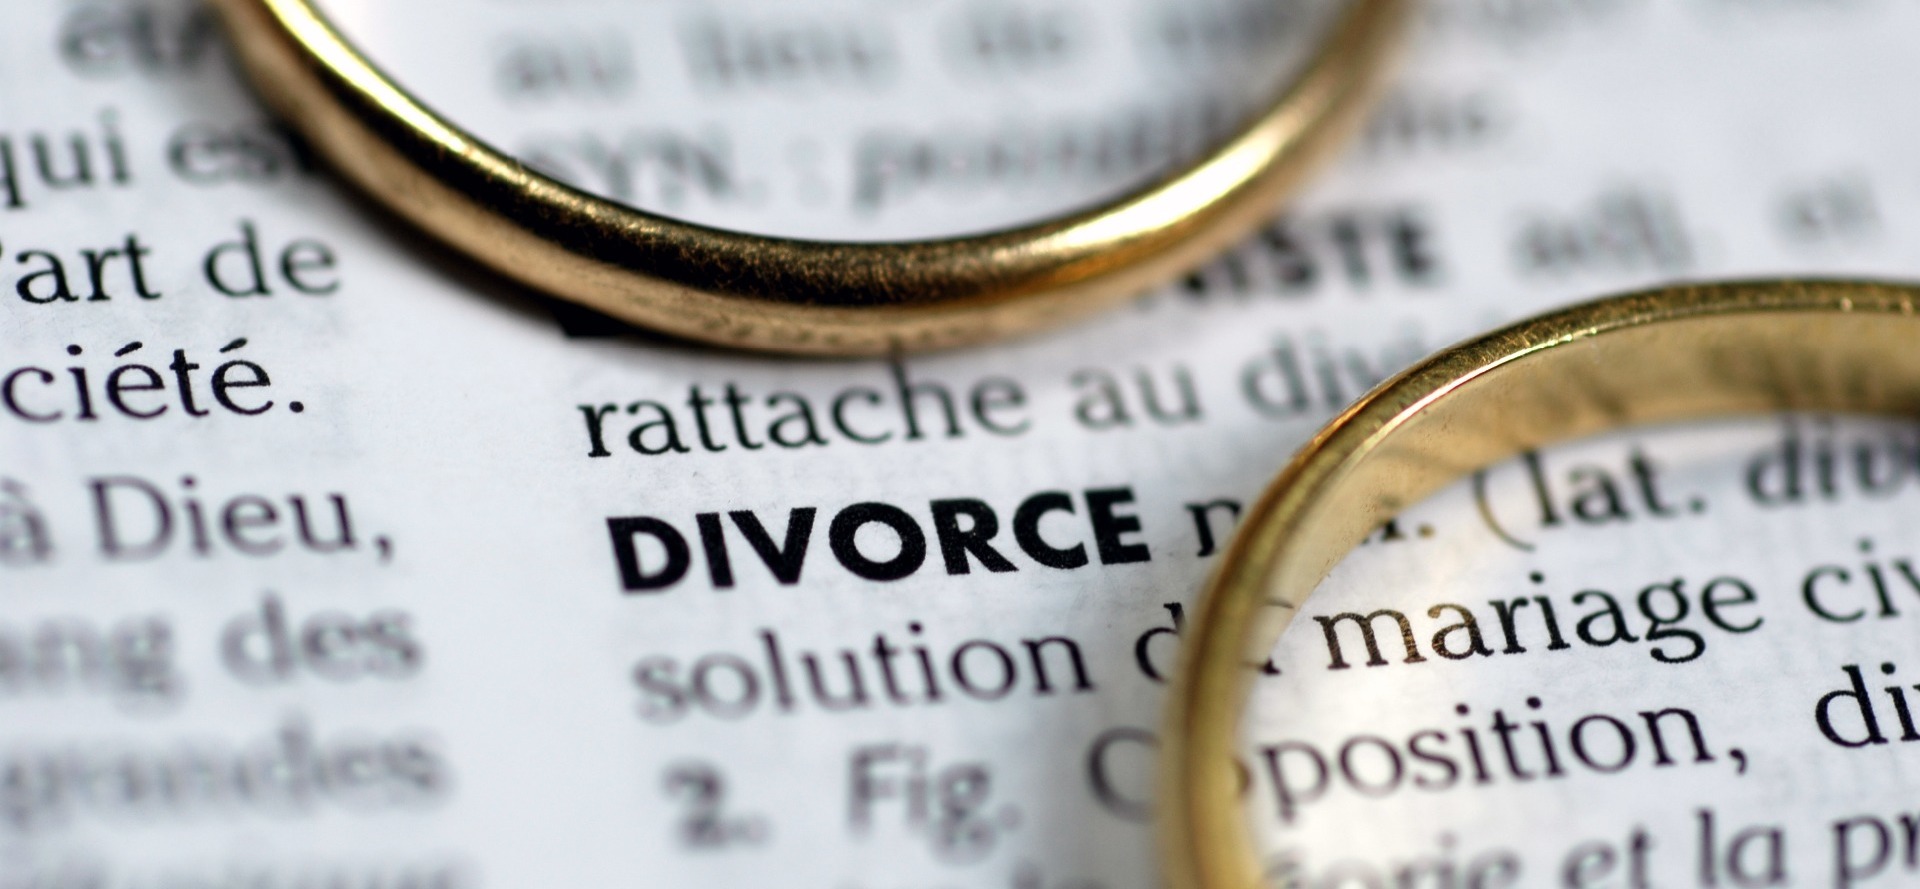 Two gold wedding rings placed on a page showing the dictionary definition of Divorce